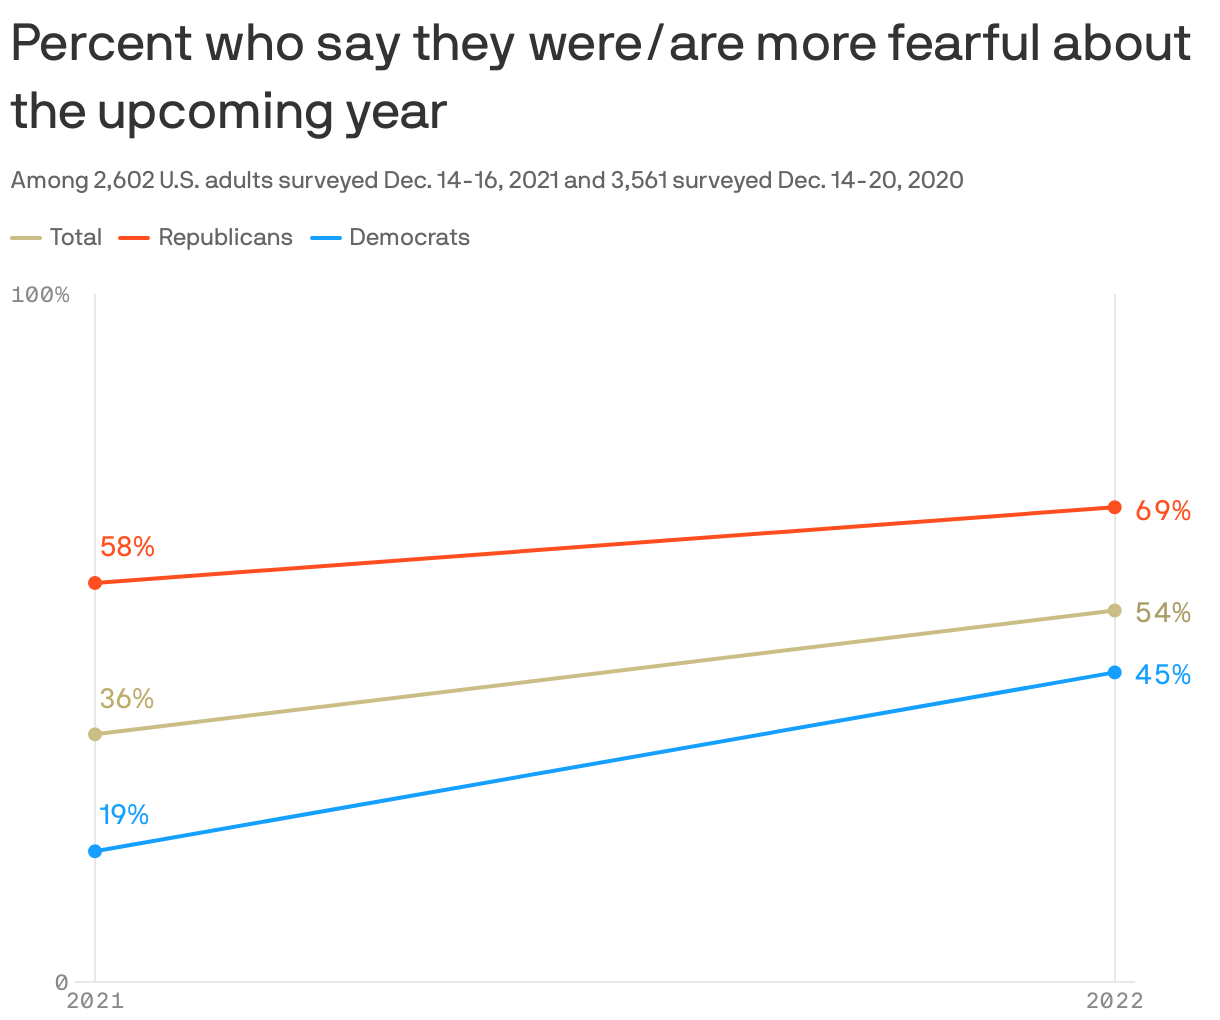 Percent who say they were/are more fearful about the upcoming year